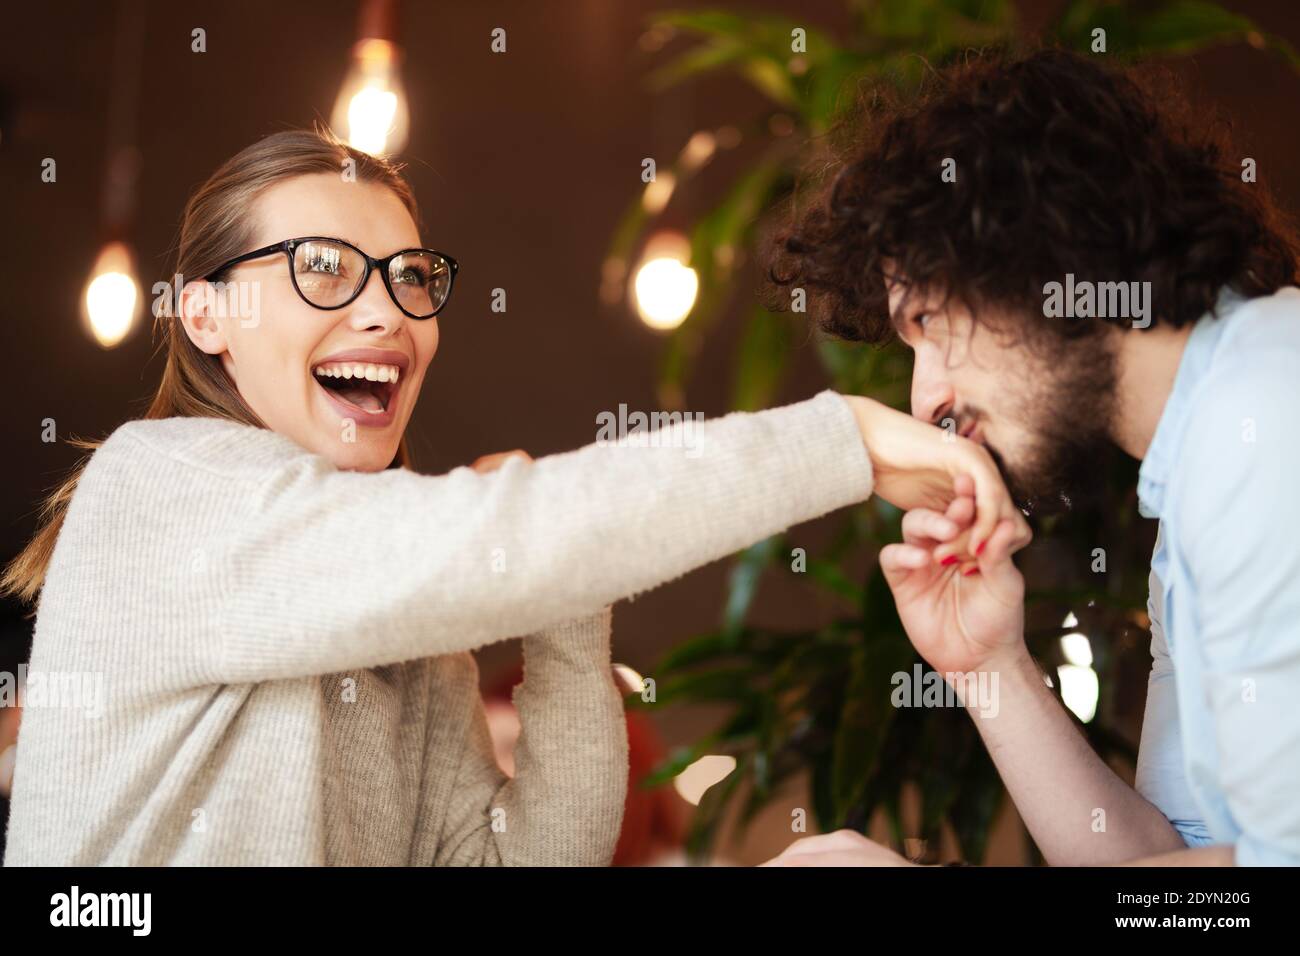 Lovely couple having a meeting at a cafe bar. Boy kissing girl's hand. Stock Photo